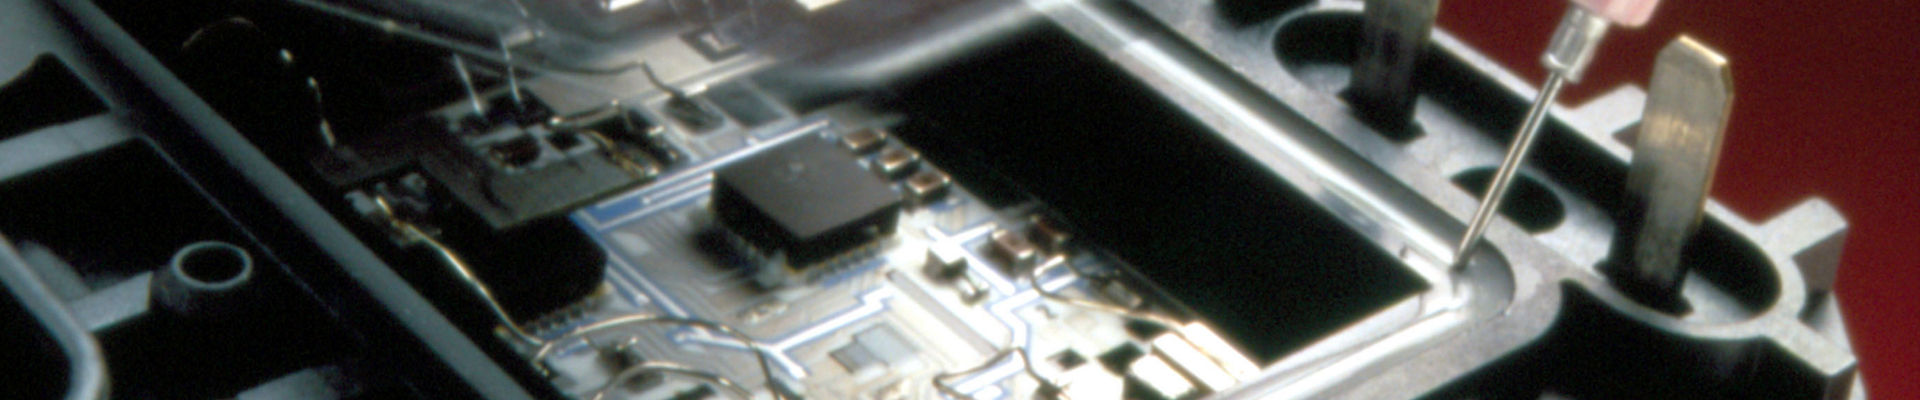 Adhesive applied to seal heatsink assembly.